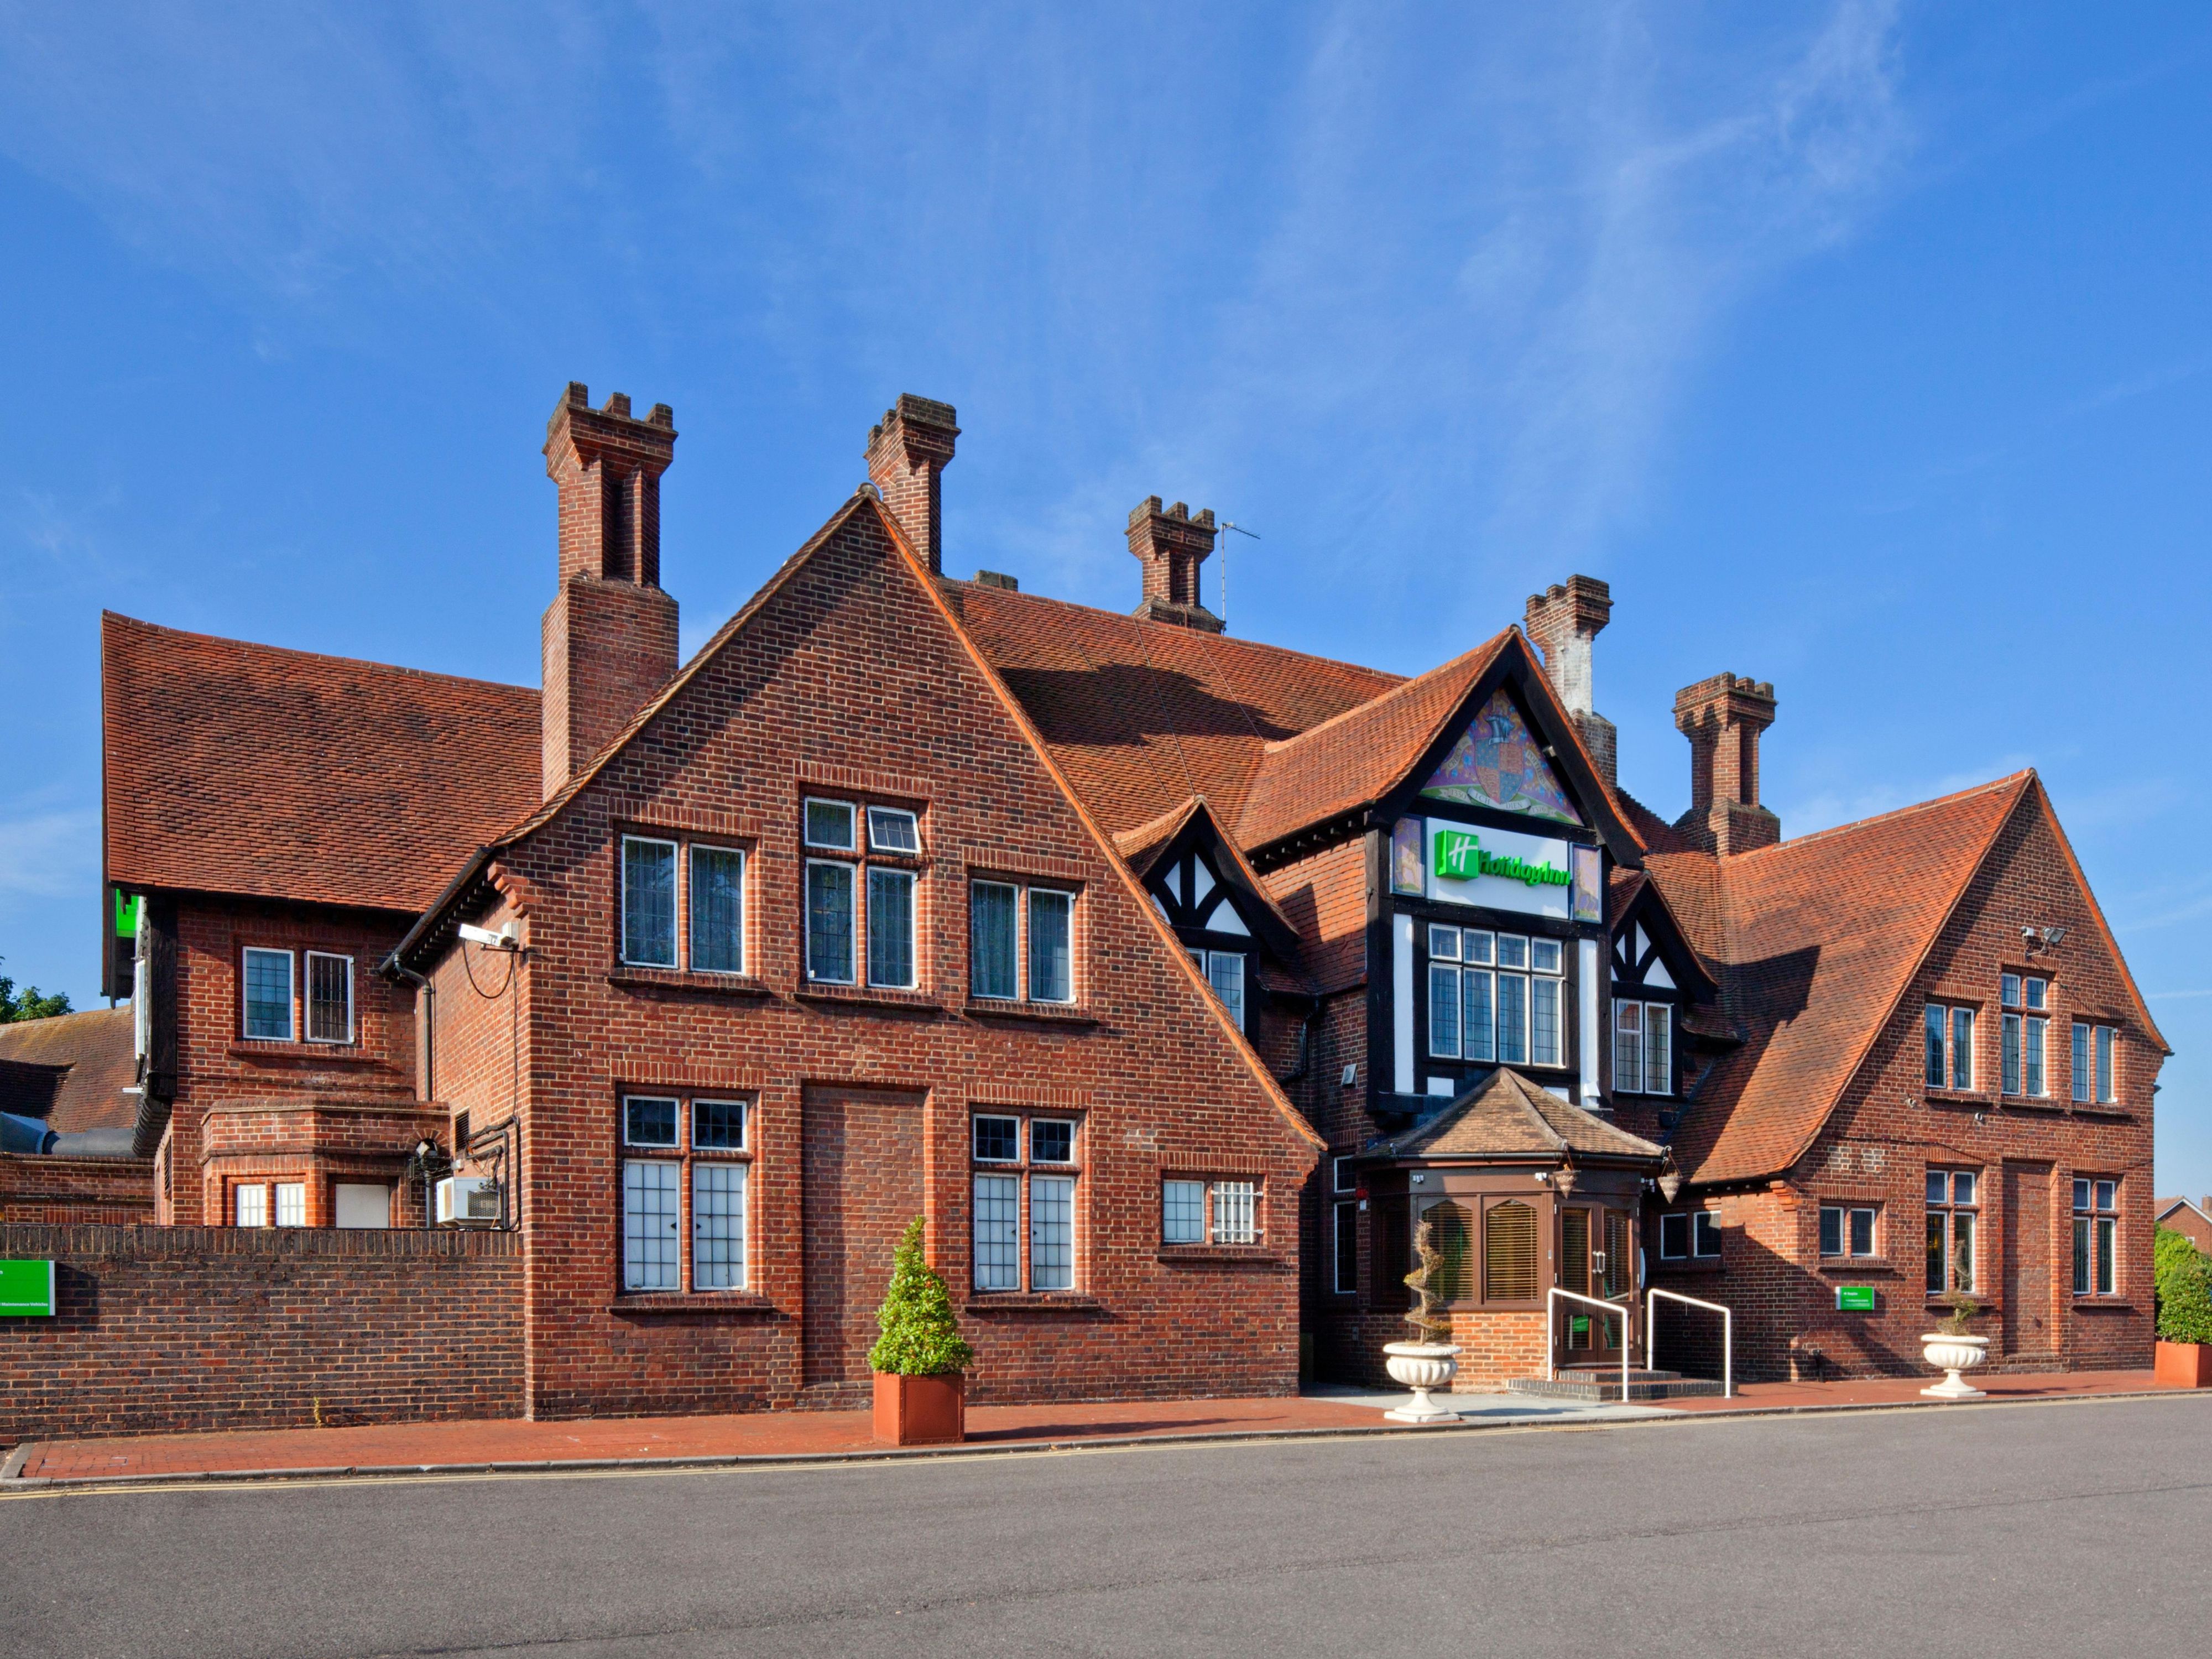 Ideal for your next staycation, Bexley train station is just a 10-minute walk away with a direct train getting you into London within 30 minutes. We have on-site parking for our guests available for £7.00 per day. 